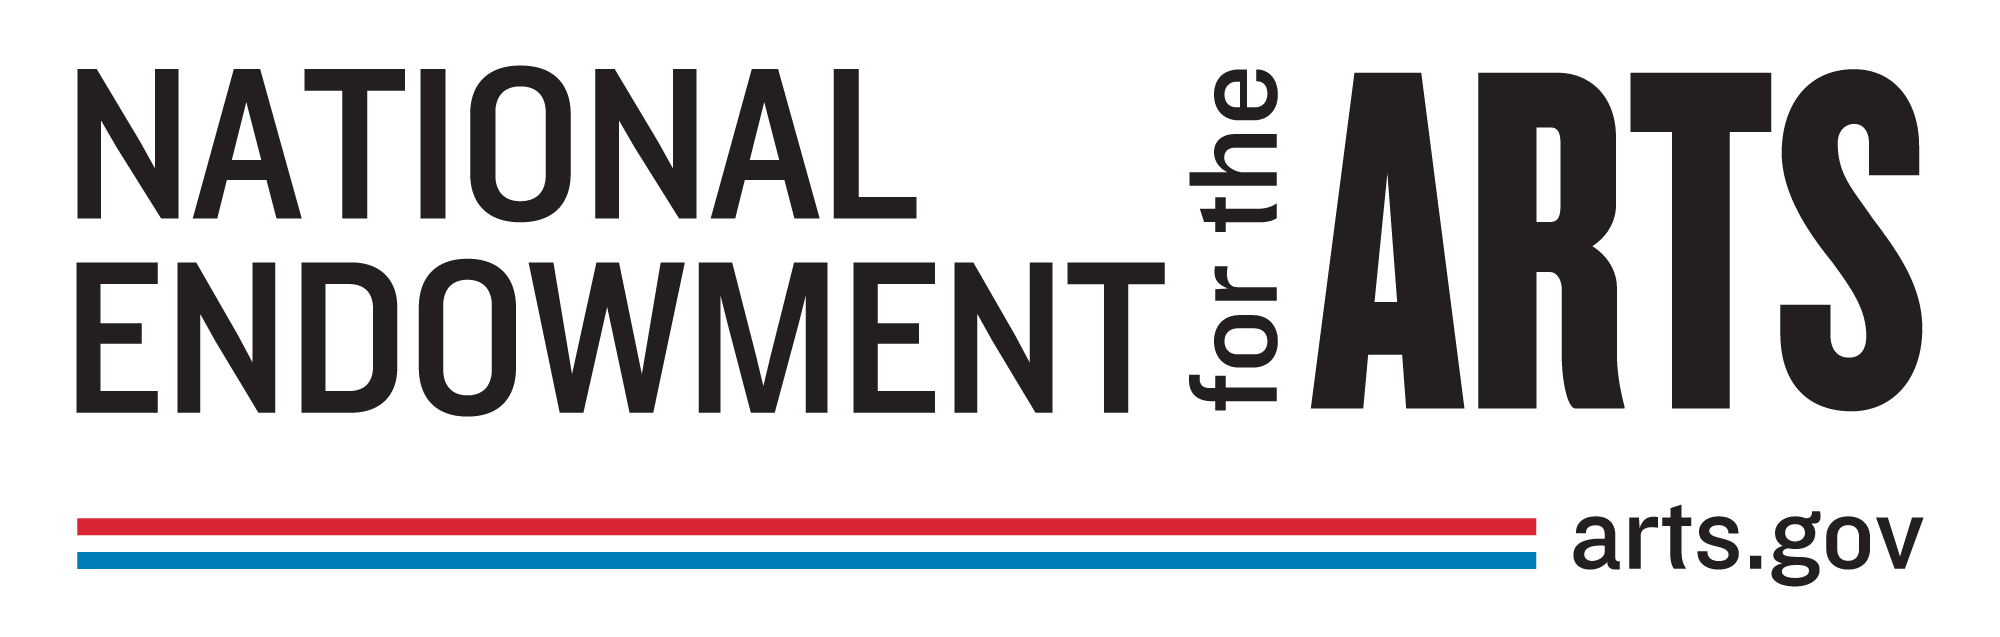 national_endowment_for_the_arts_2018_logo_horizontal.png